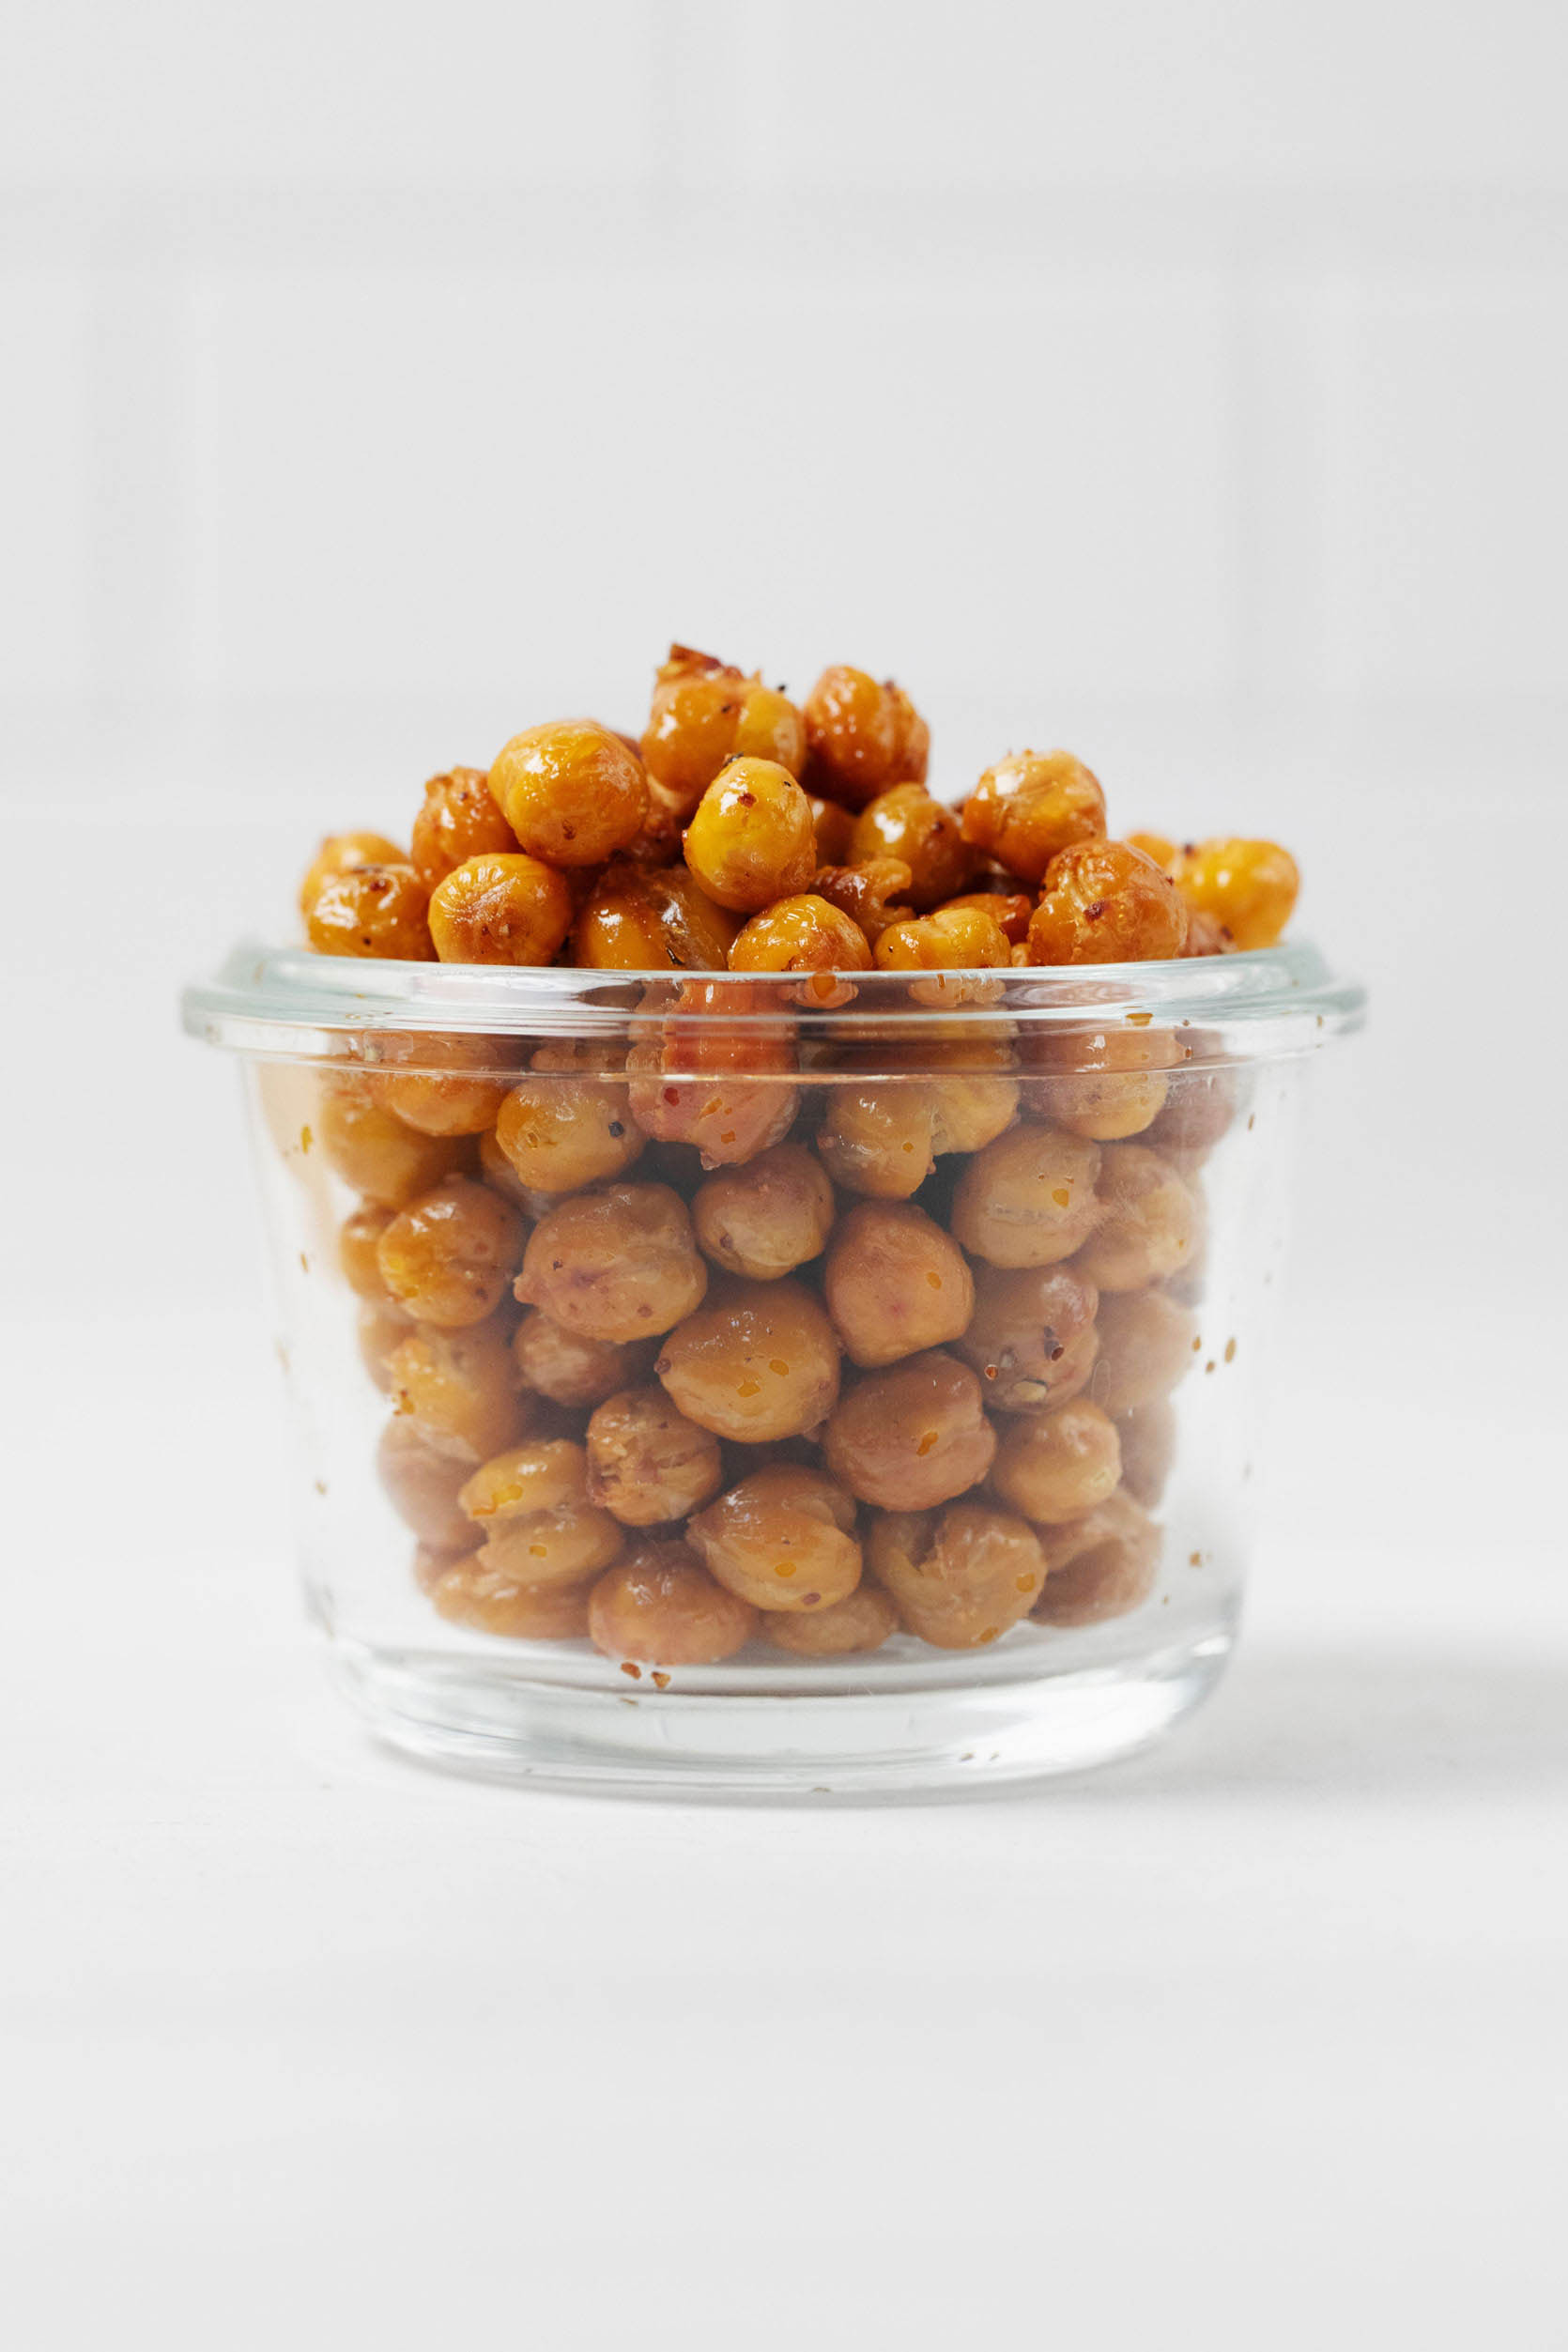 A glass, Weck mason jar is filled with golden, crispy roasted chickpeas. A white tiled surface is visible behind the jar.